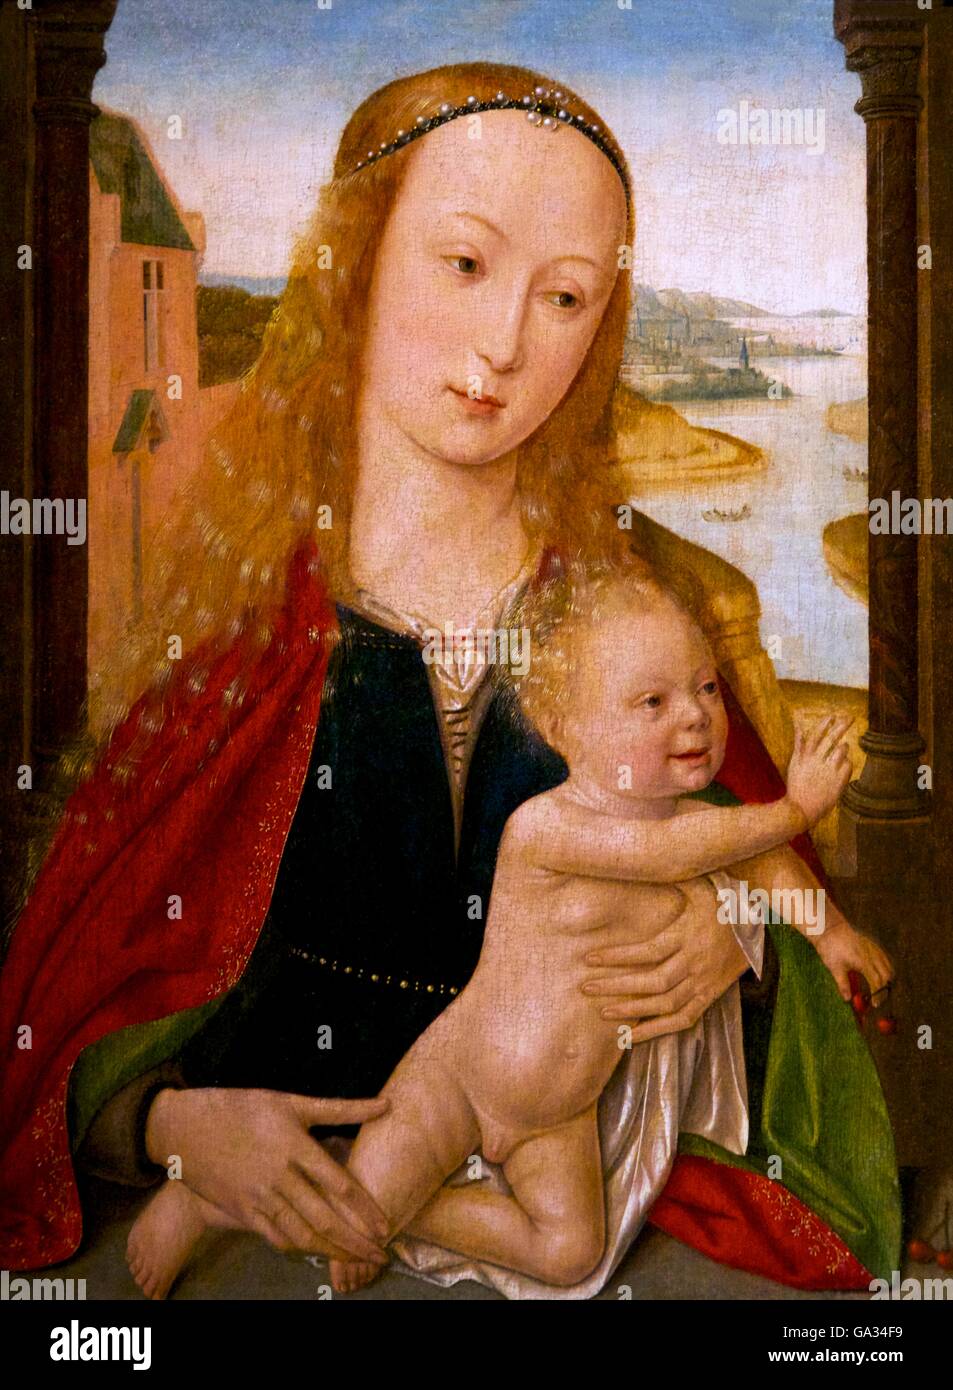 Diptych with Virgin, Child and donor, by Master of Bruges, 1495,  Courtauld Gallery, Somerset House, London, England, UK Stock Photo